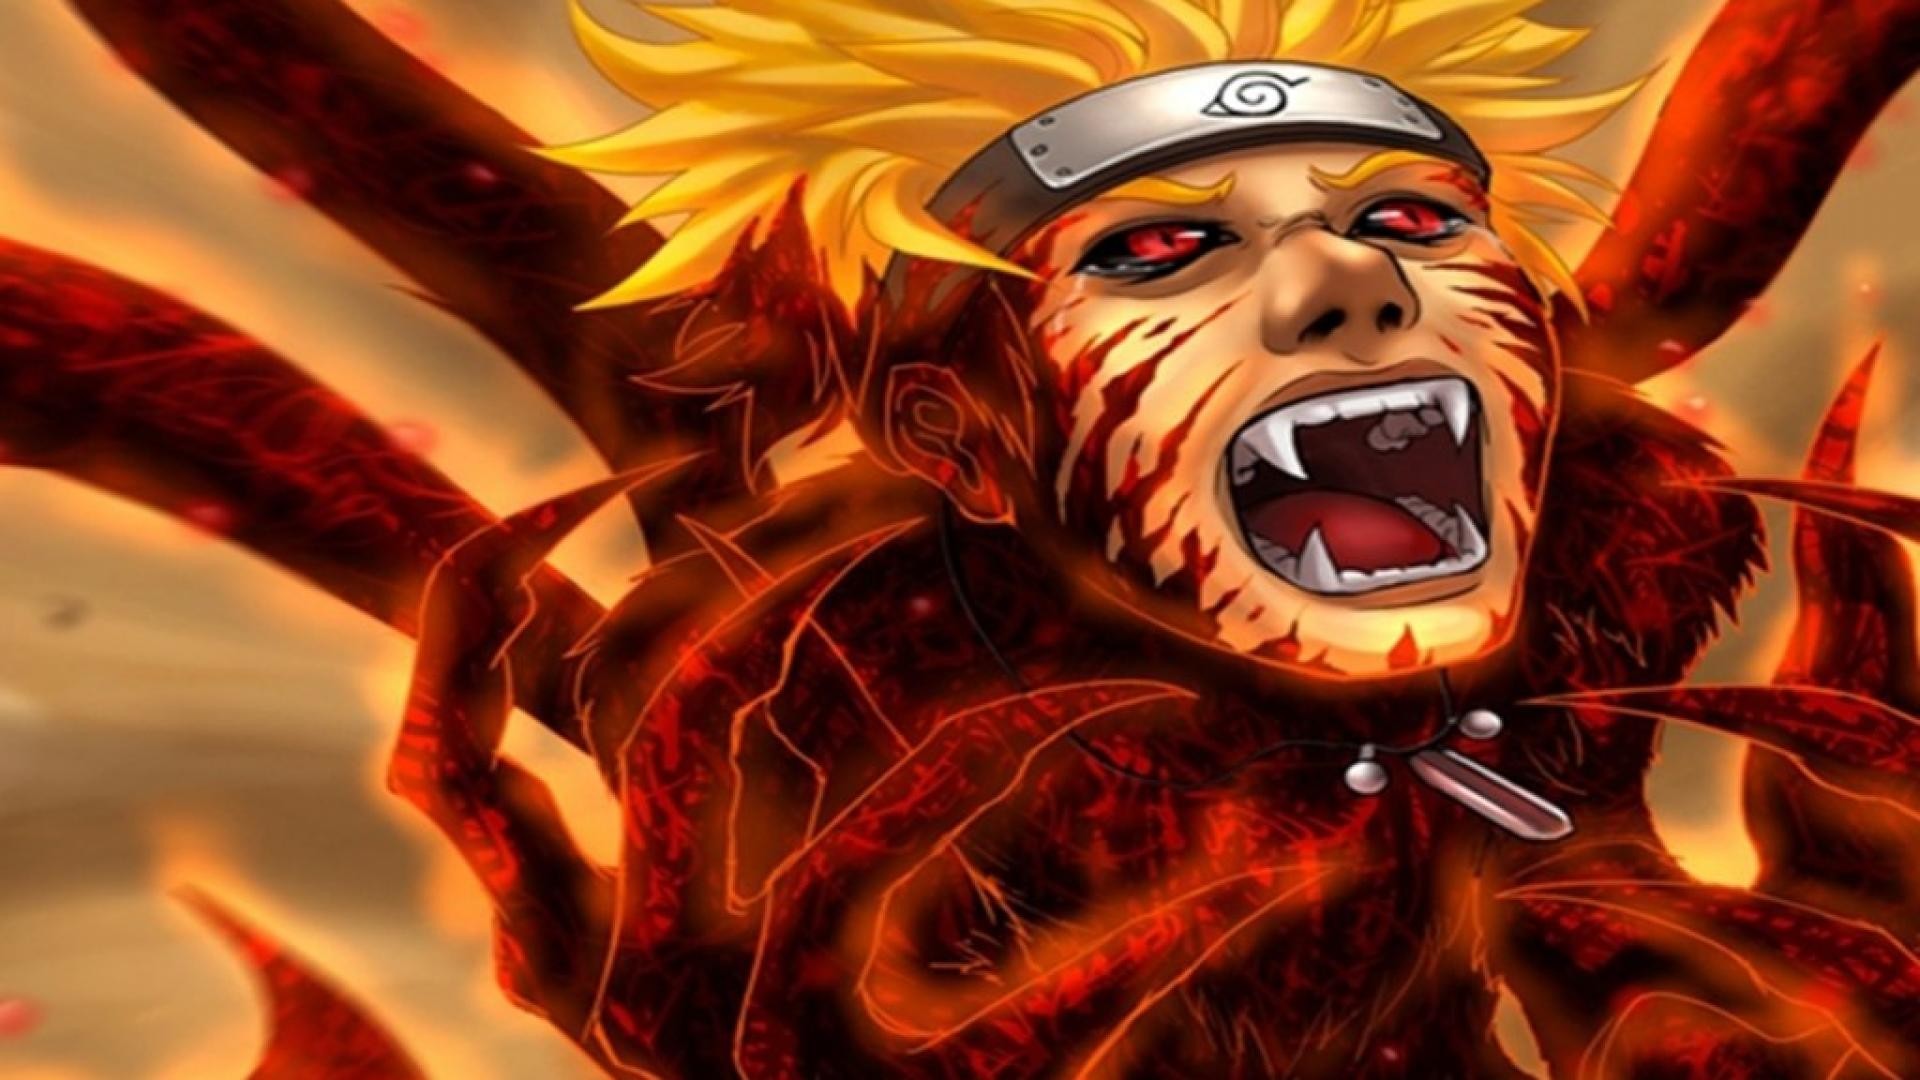 1920x1080 HD Quality Images of Naruto Â»  px for desktop and mobile